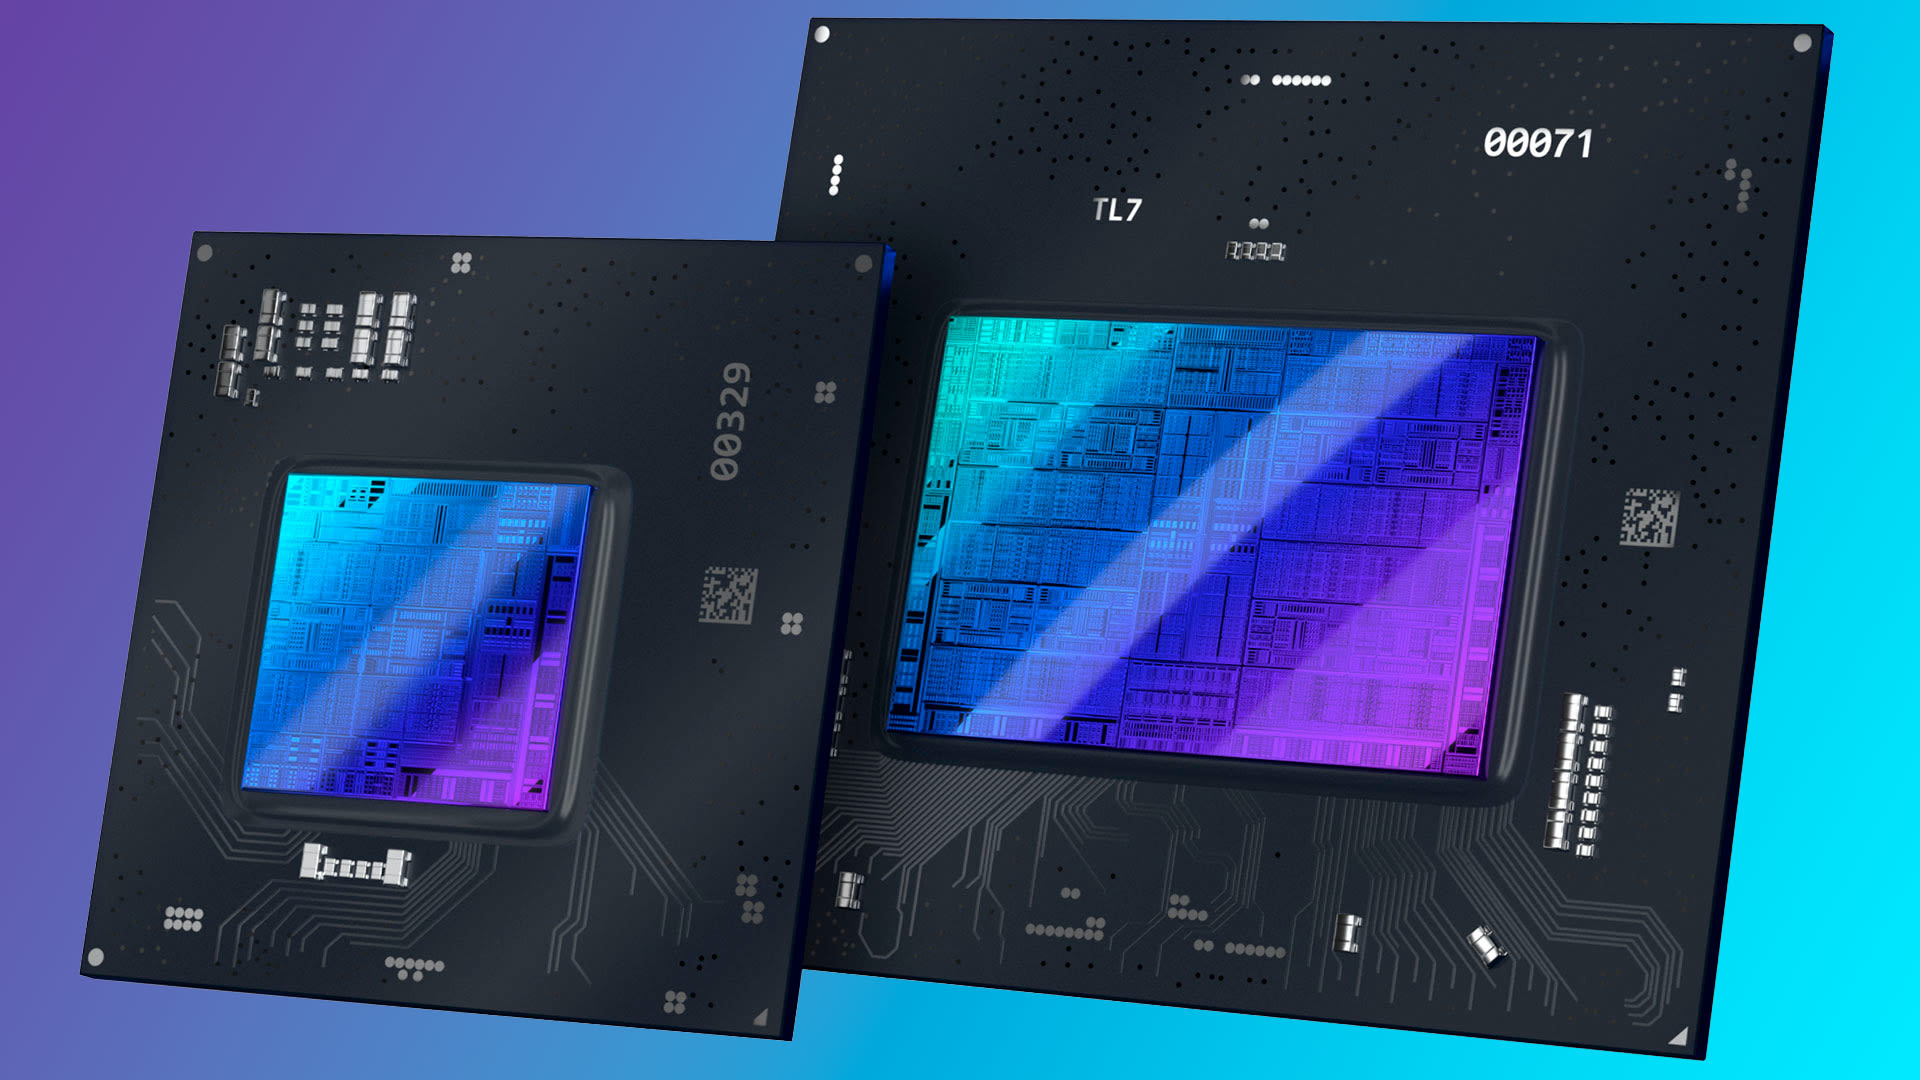 Intel's Open Image Denoise 2.3.0 library adds support for Battlemage GPUs, Arrow Lake, and Lunar Lake CPUs — Xe2 graphics edge closer